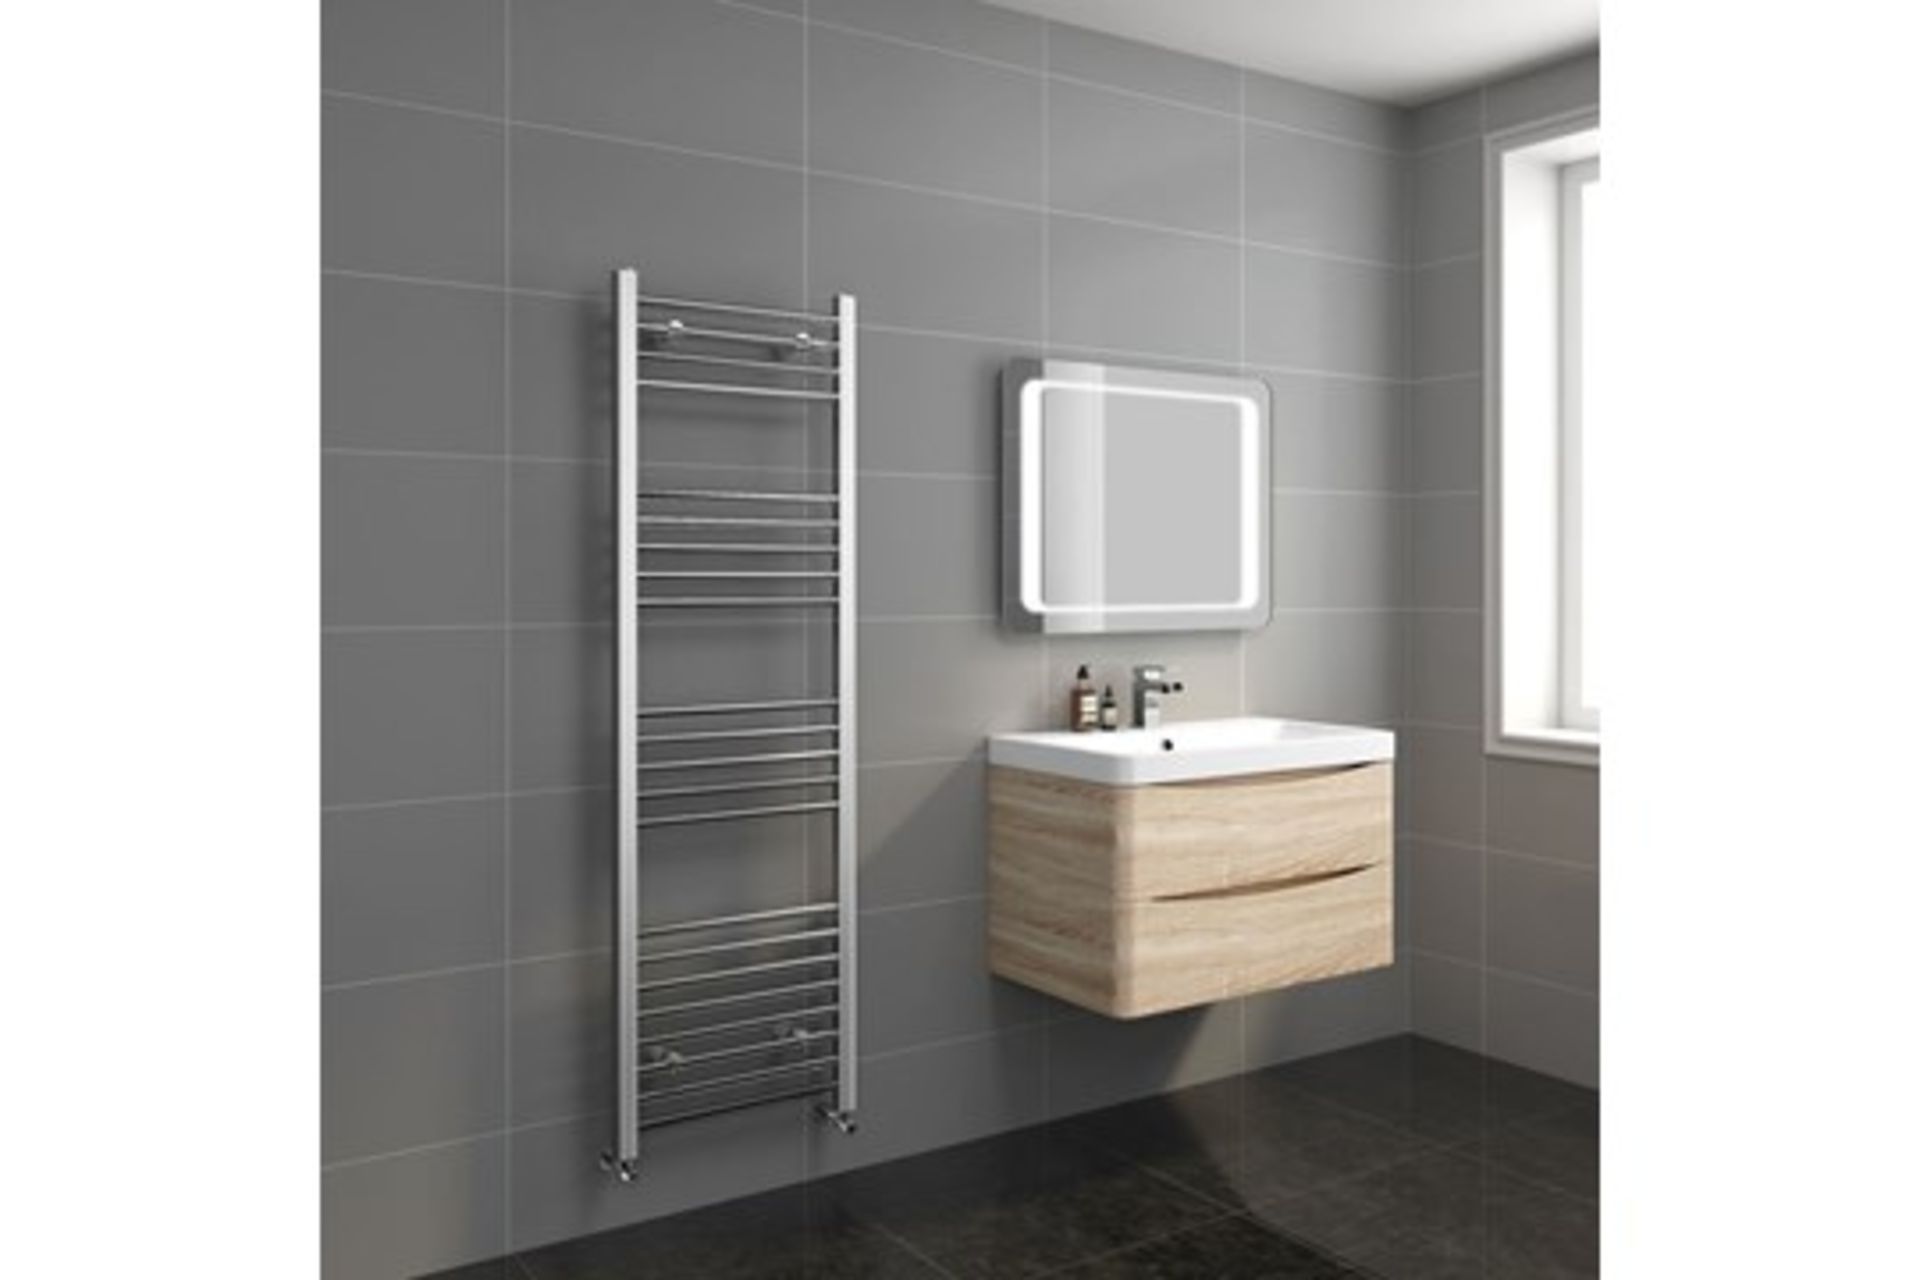 BRAND NEW BOXED 1600x500mm - 20mm Tubes - Chrome Heated Straight Rail Ladder Towel Radiator. Ma... - Image 2 of 3